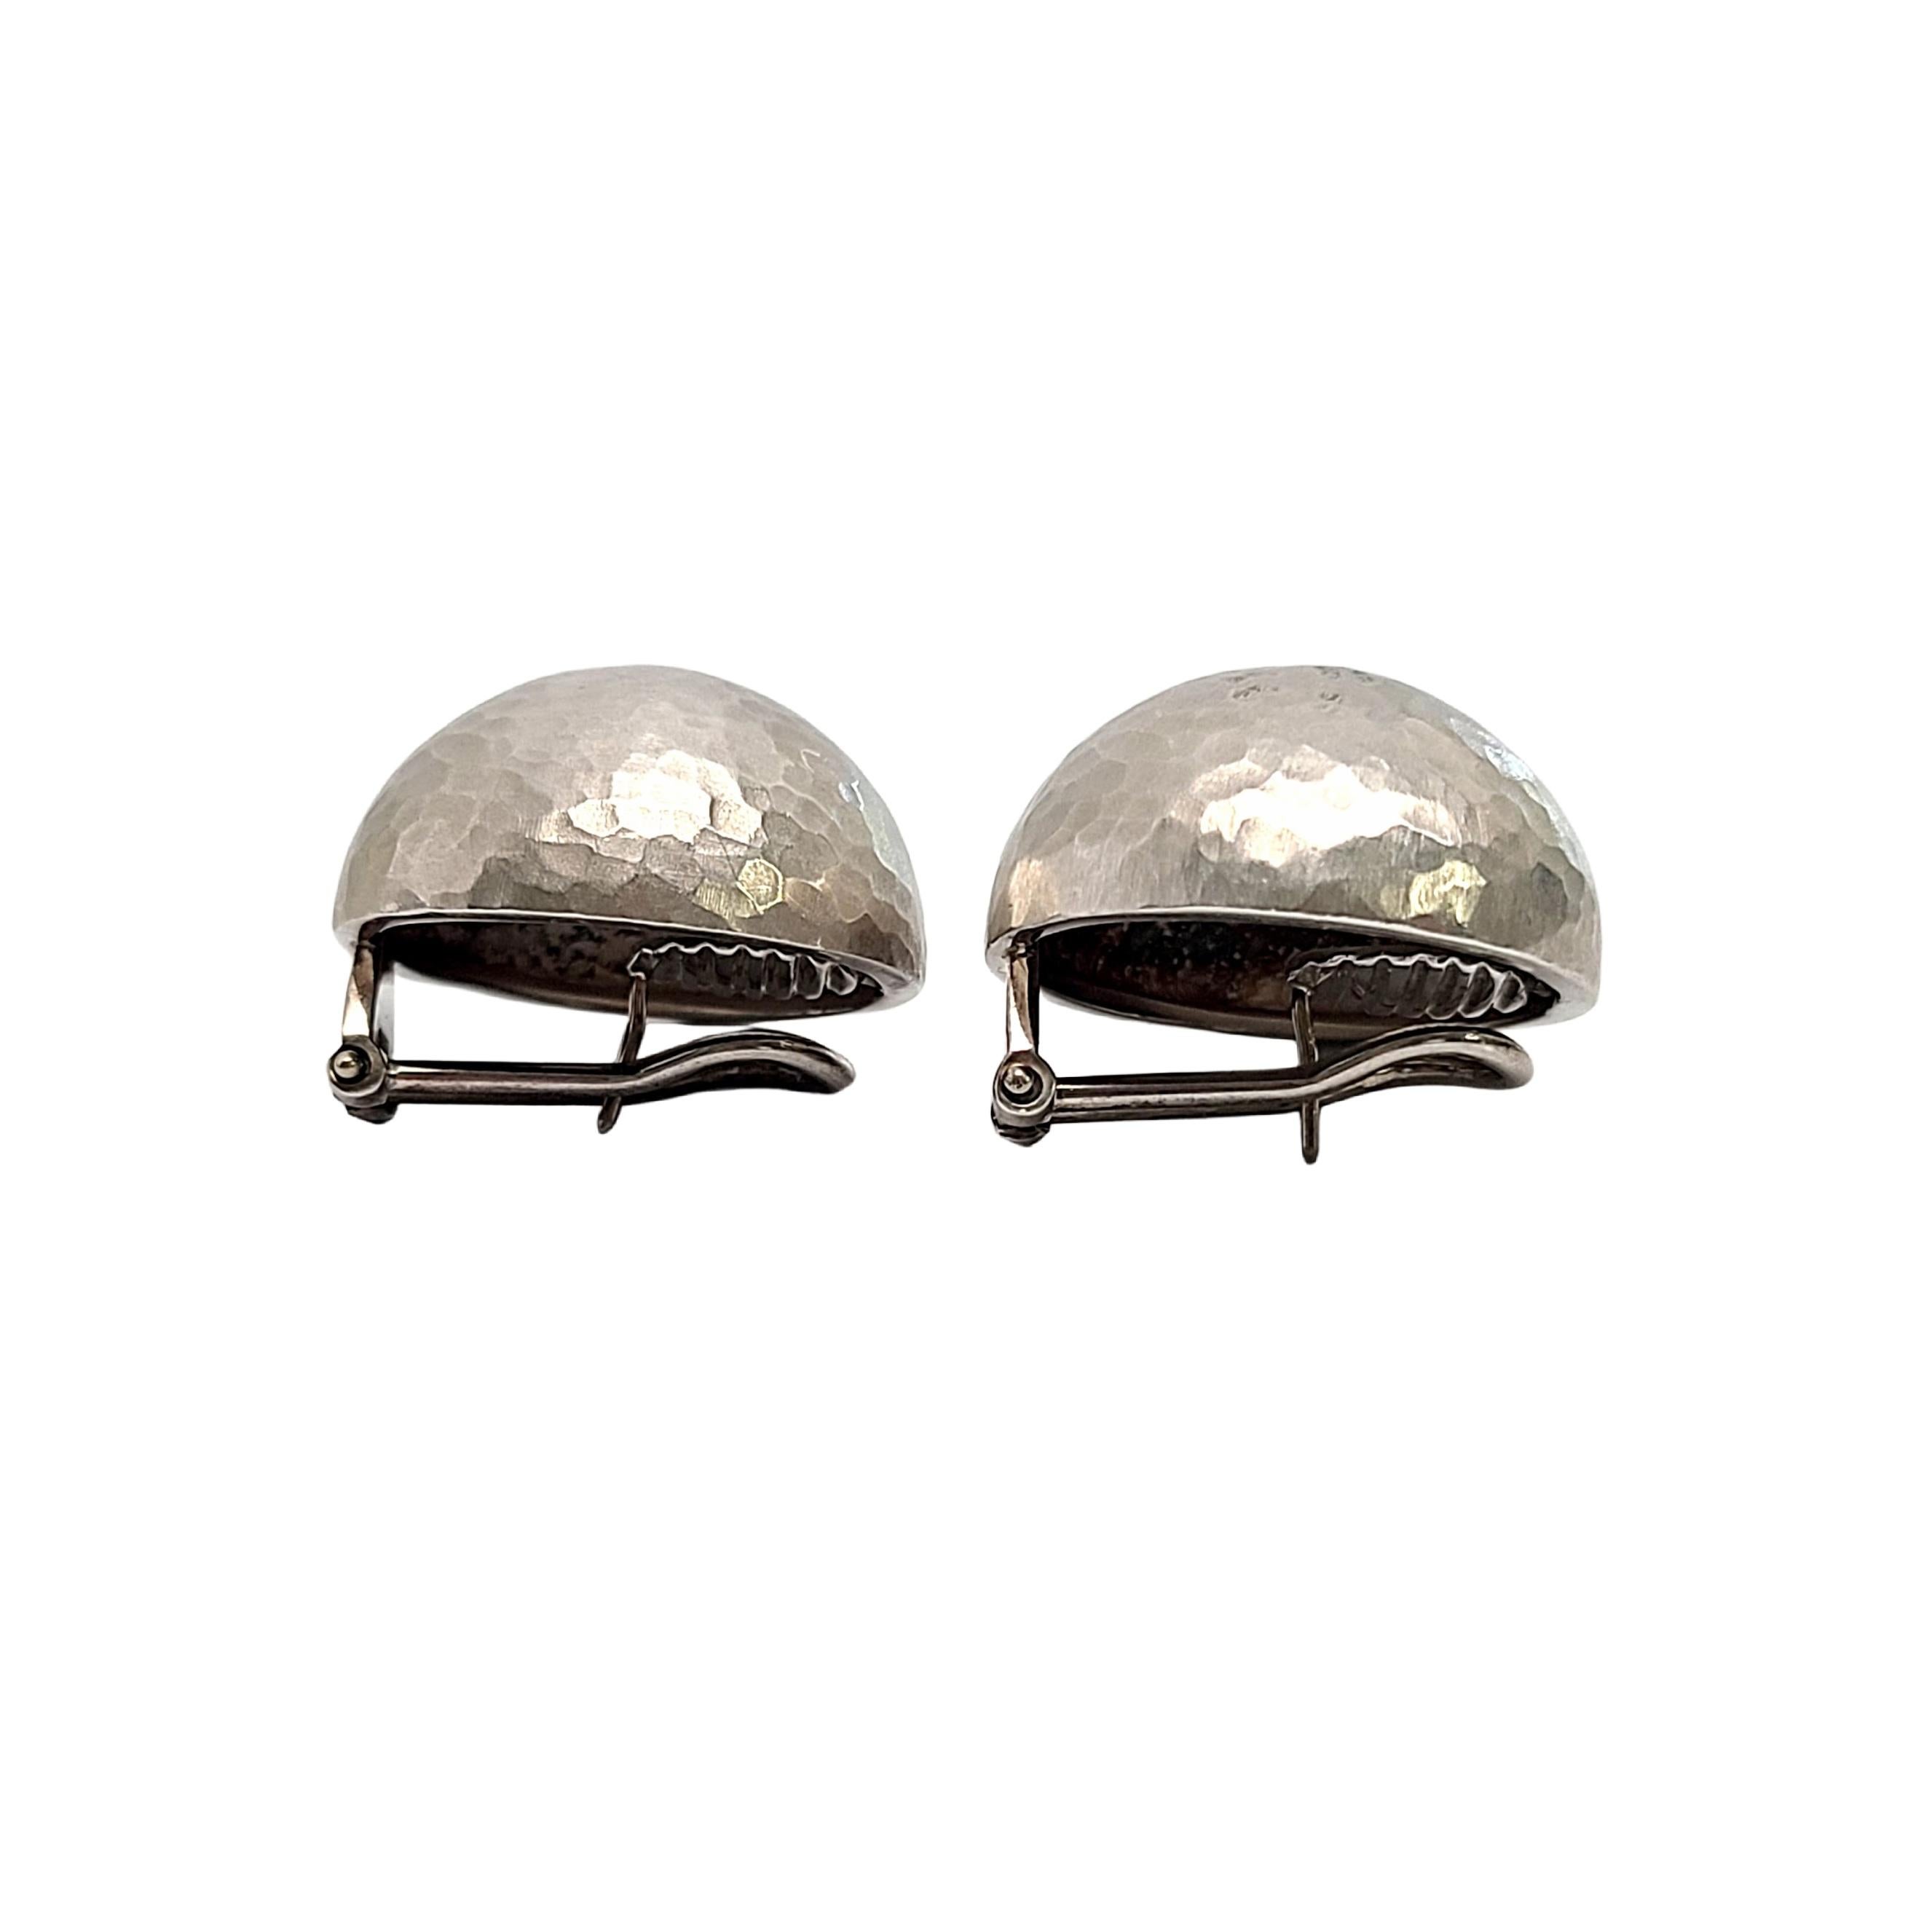 Tiffany & Co sterling silver hammered dome earrings by Paloma Picasso for Tiffany & Co.

Authentic Tiffany earrings featuring classic hammered design on large dome earrings with an omega back. Tiffany box and pouch are not included.

Measures approx